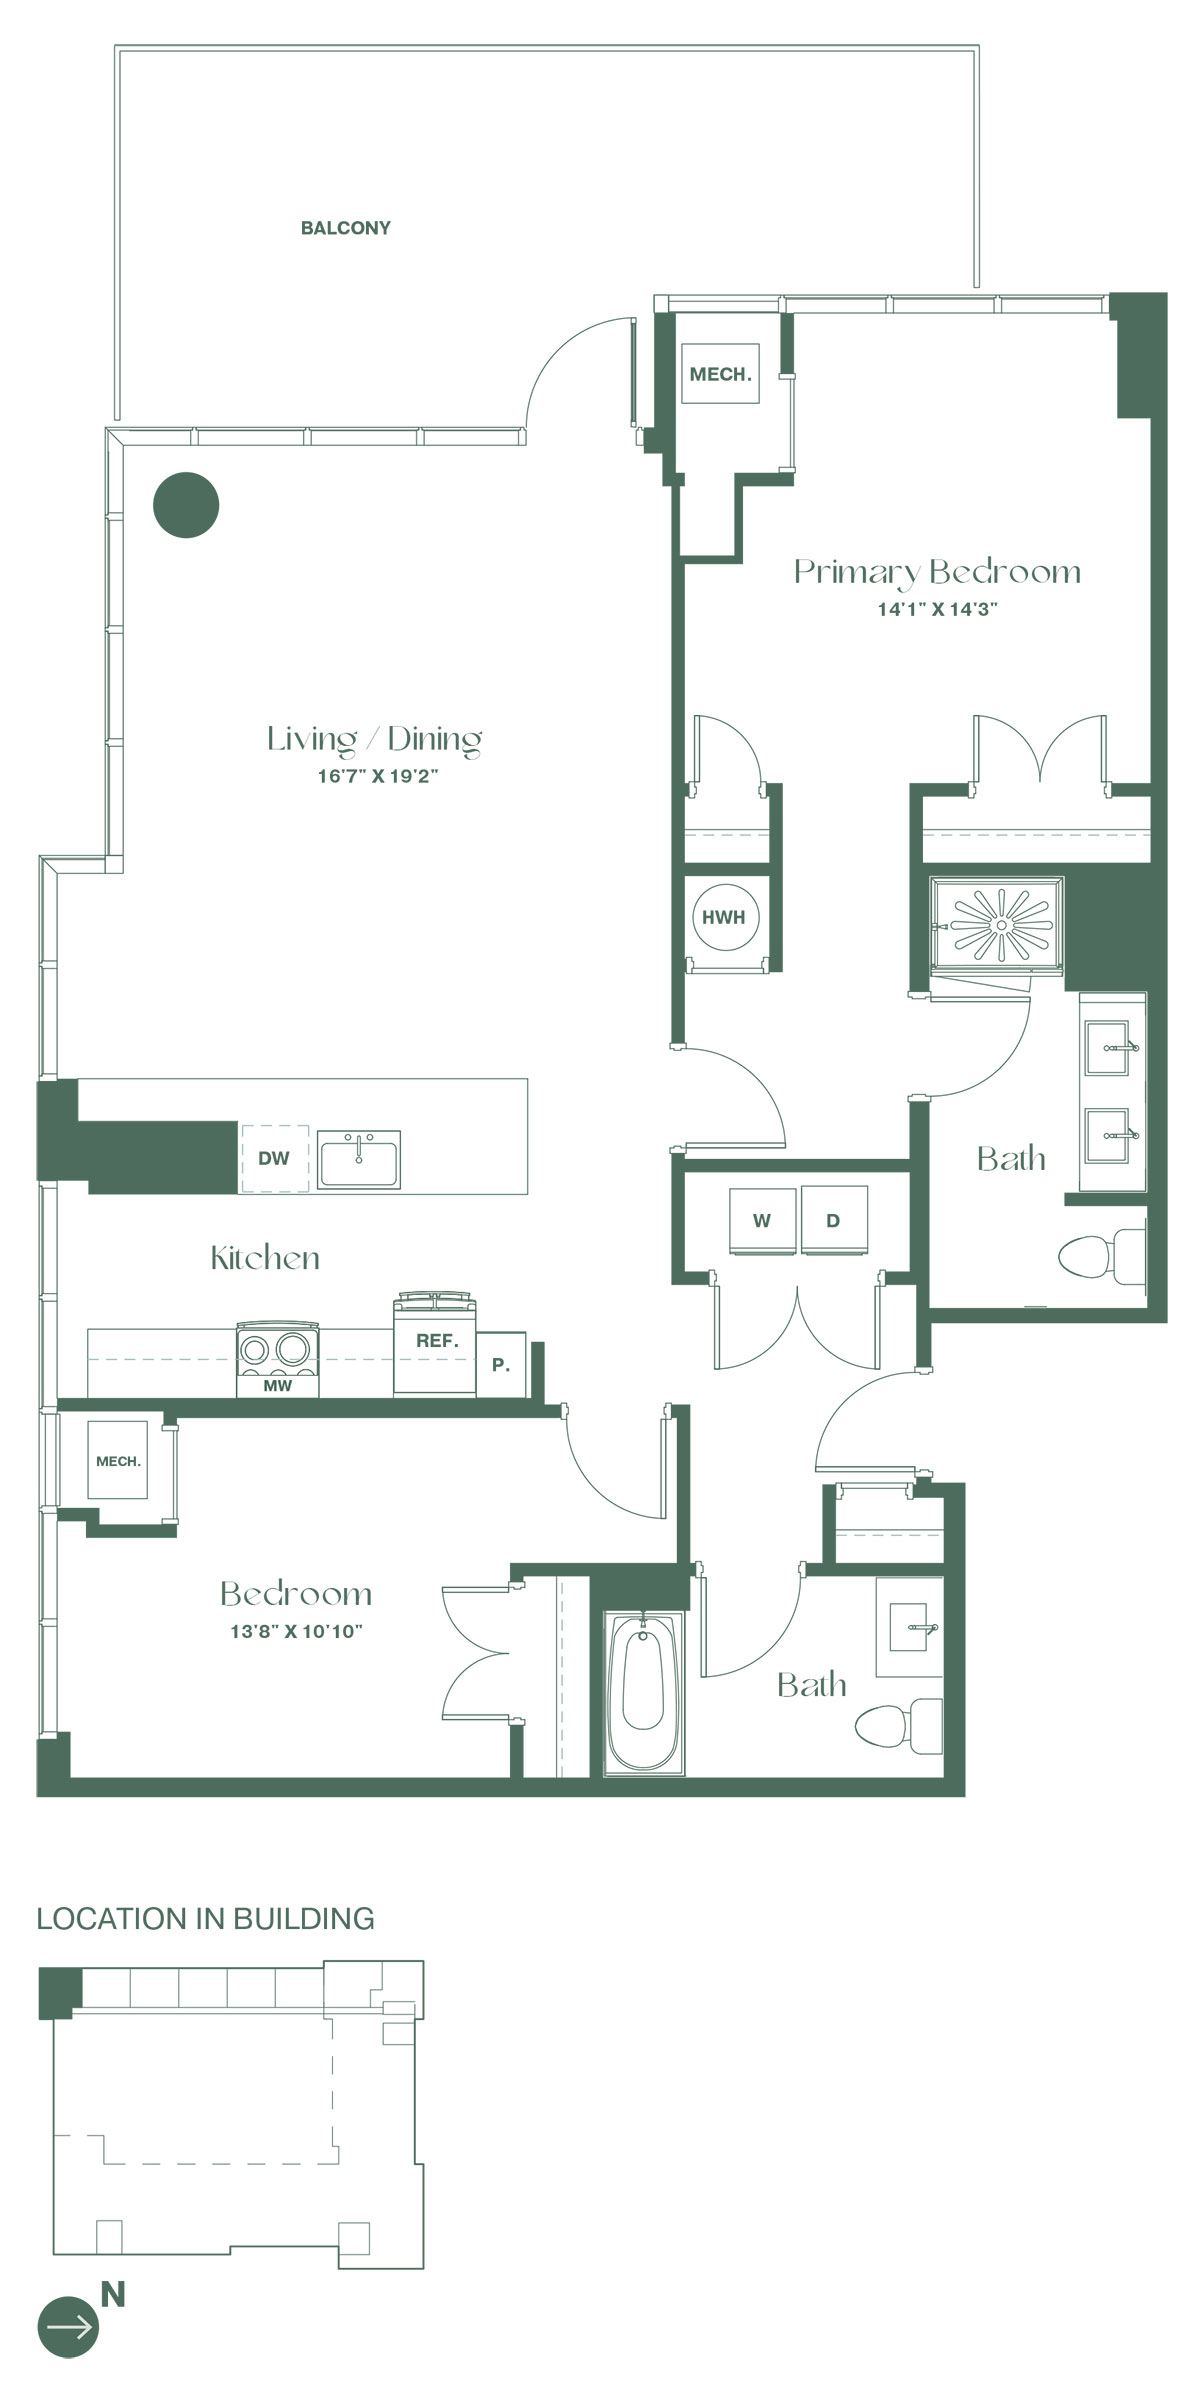 This floorplan for a two-bedroom, two-bathroom apartment at RVR at Xchange shows an entrance hallway, leading to a full bathroom and a bedroom. Continue on to the open kitchen with a dishwasher and kitchen island. Past the kitchen is a spacious living and dining room area with an expansive balcony, the entrance to the primary bedroom suite with full bathroom.